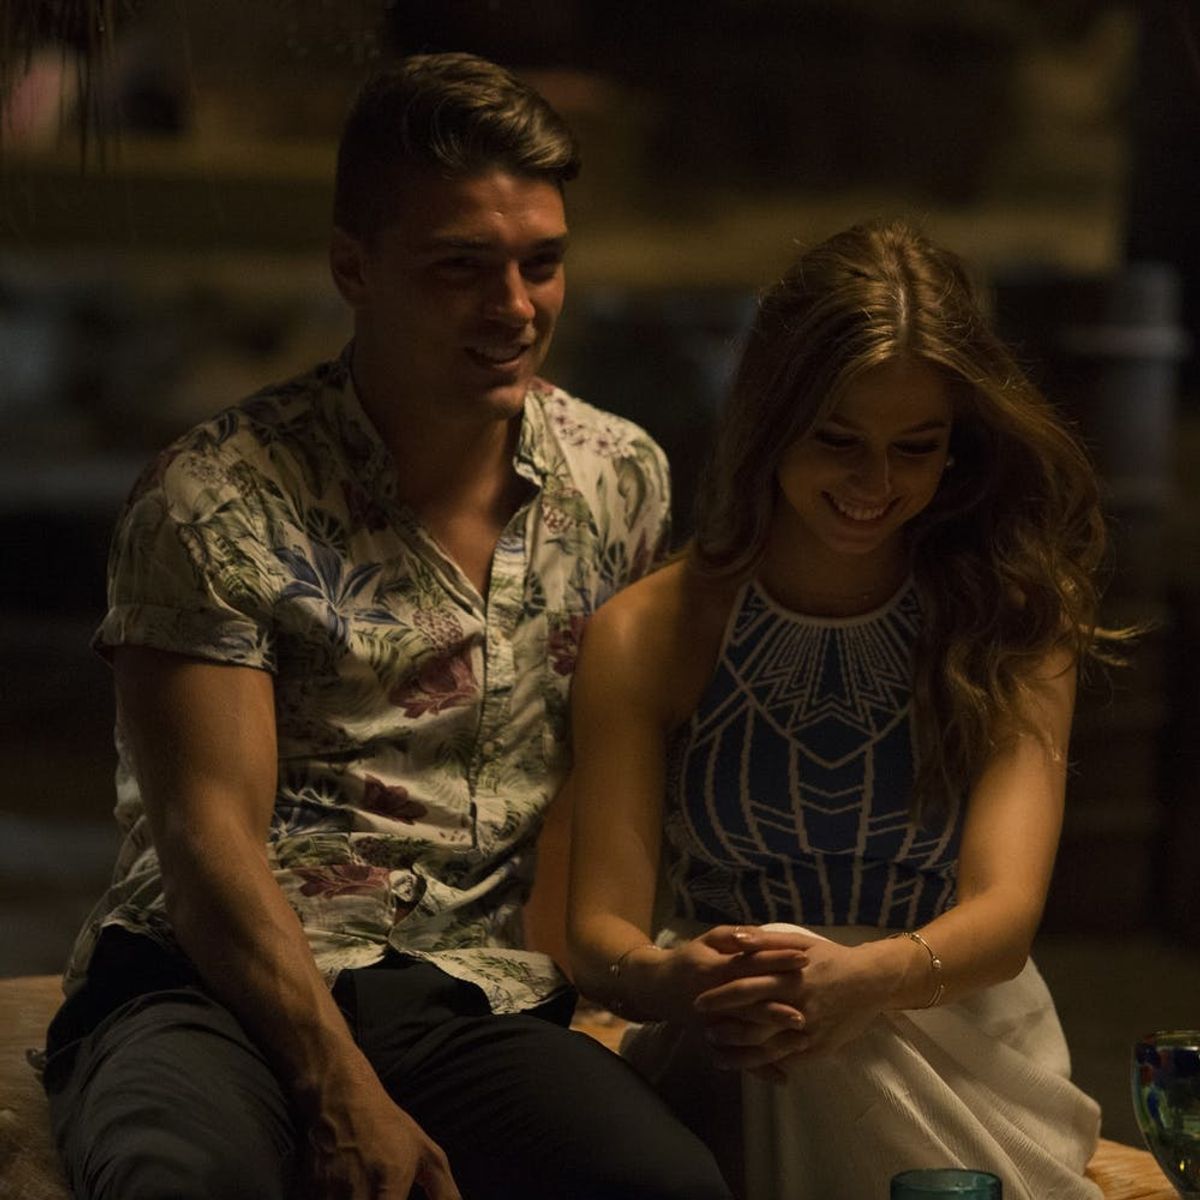 Dean Unglert Says He Hung Out With Kristina Schulman to “Work Through” Things